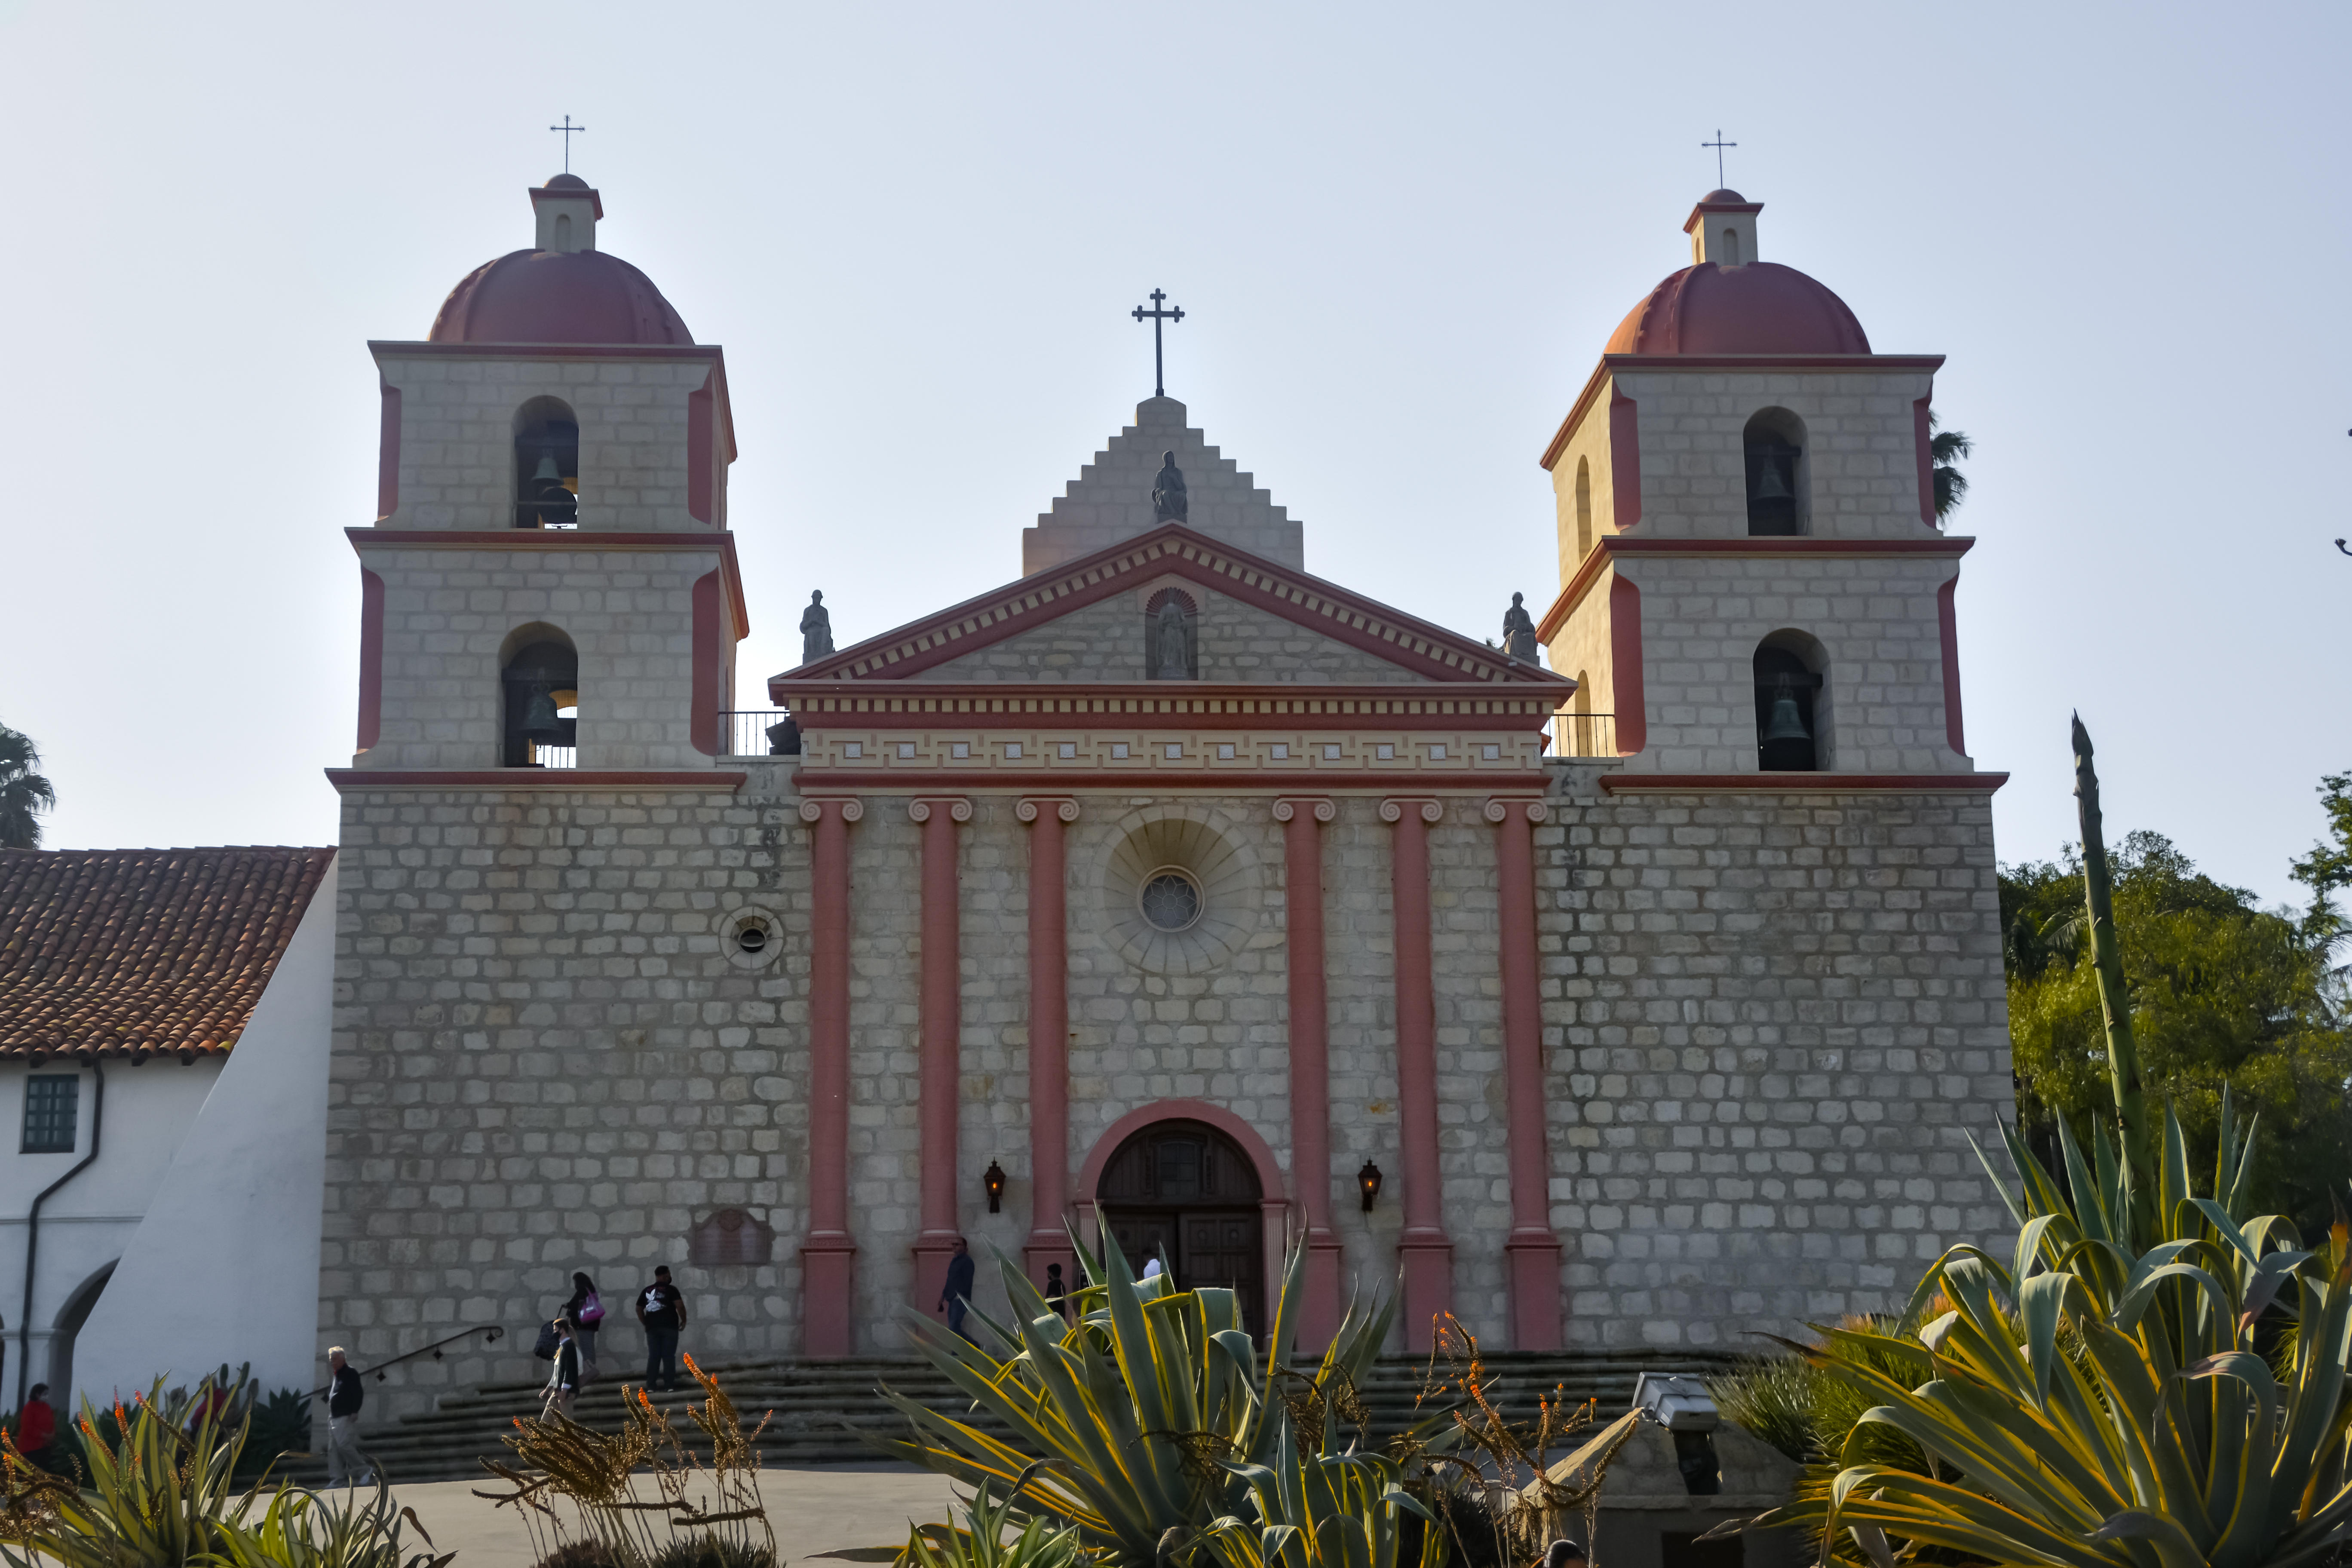 The historic Mission Santa Barbara in California, showcasing its distinctive twin bell towers with red-tiled domes, stone facade, and grand entrance flanked by statues, captured on a sunny day with vibrant greenery in the foreground